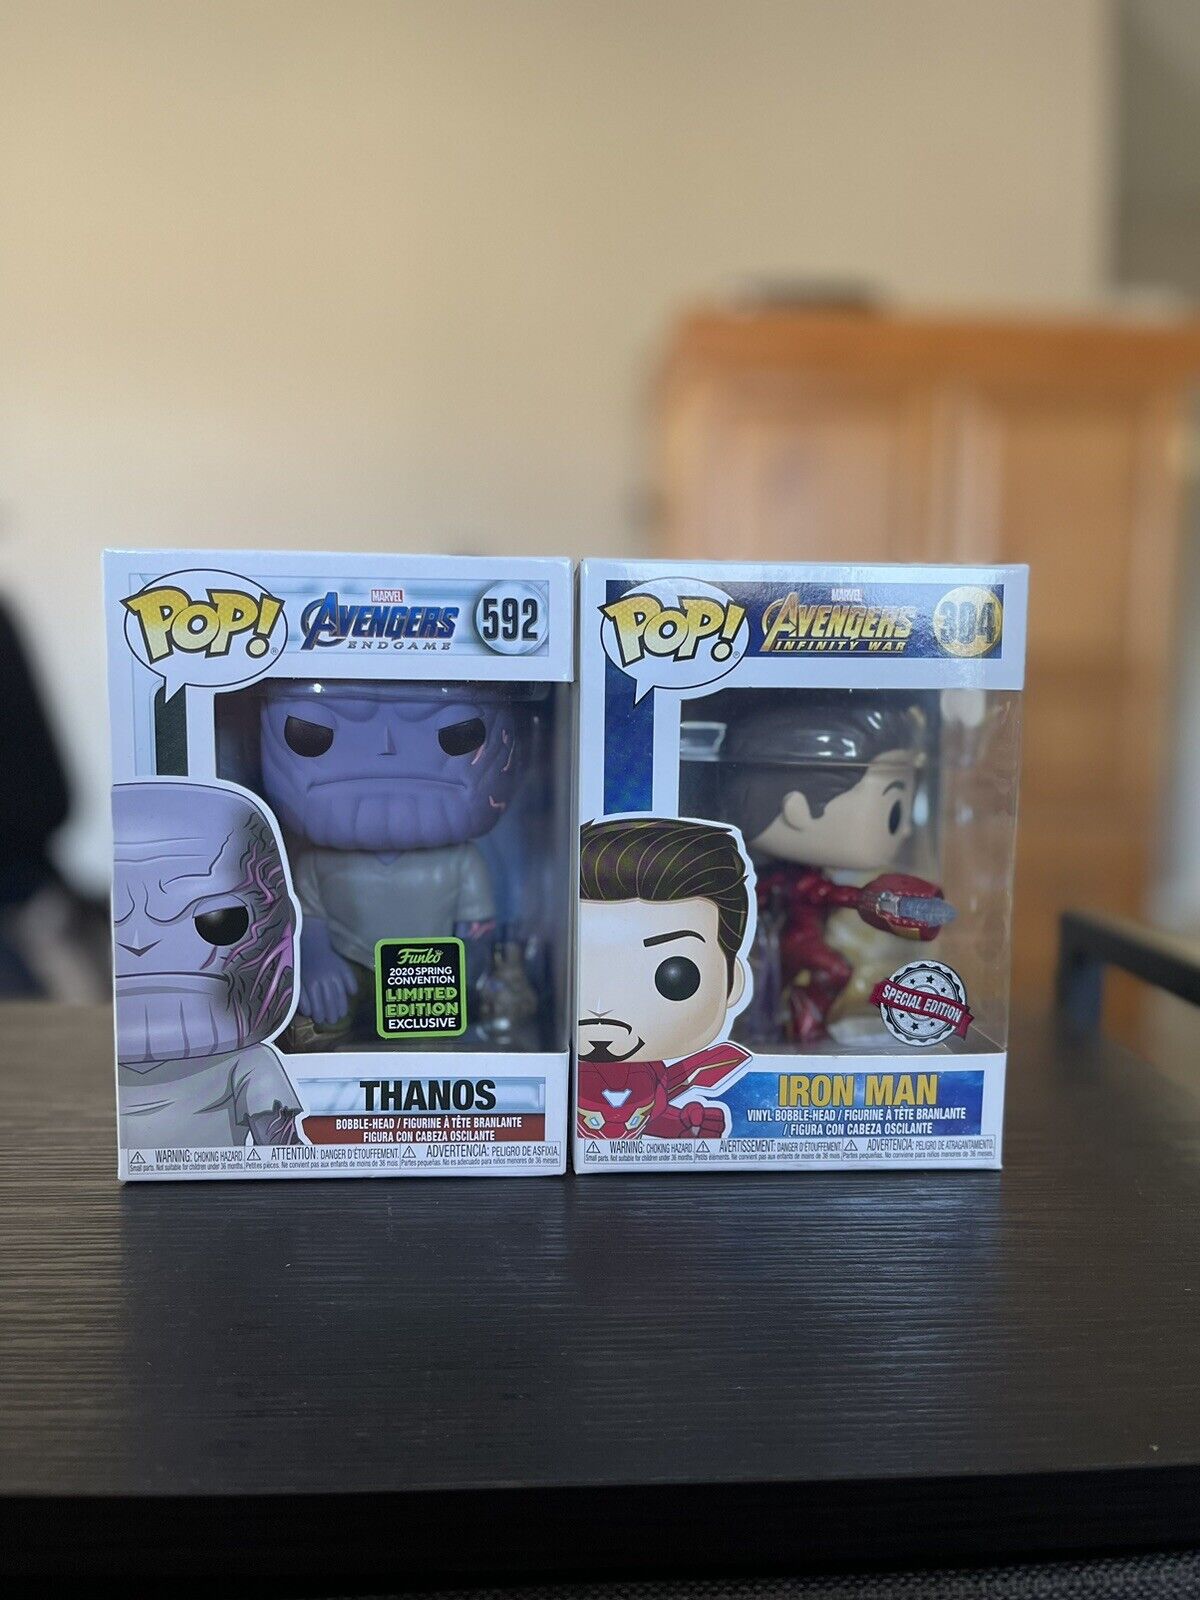 Two (2) New Avengers Funko Pops - Thanos #592 and Iron Man #304